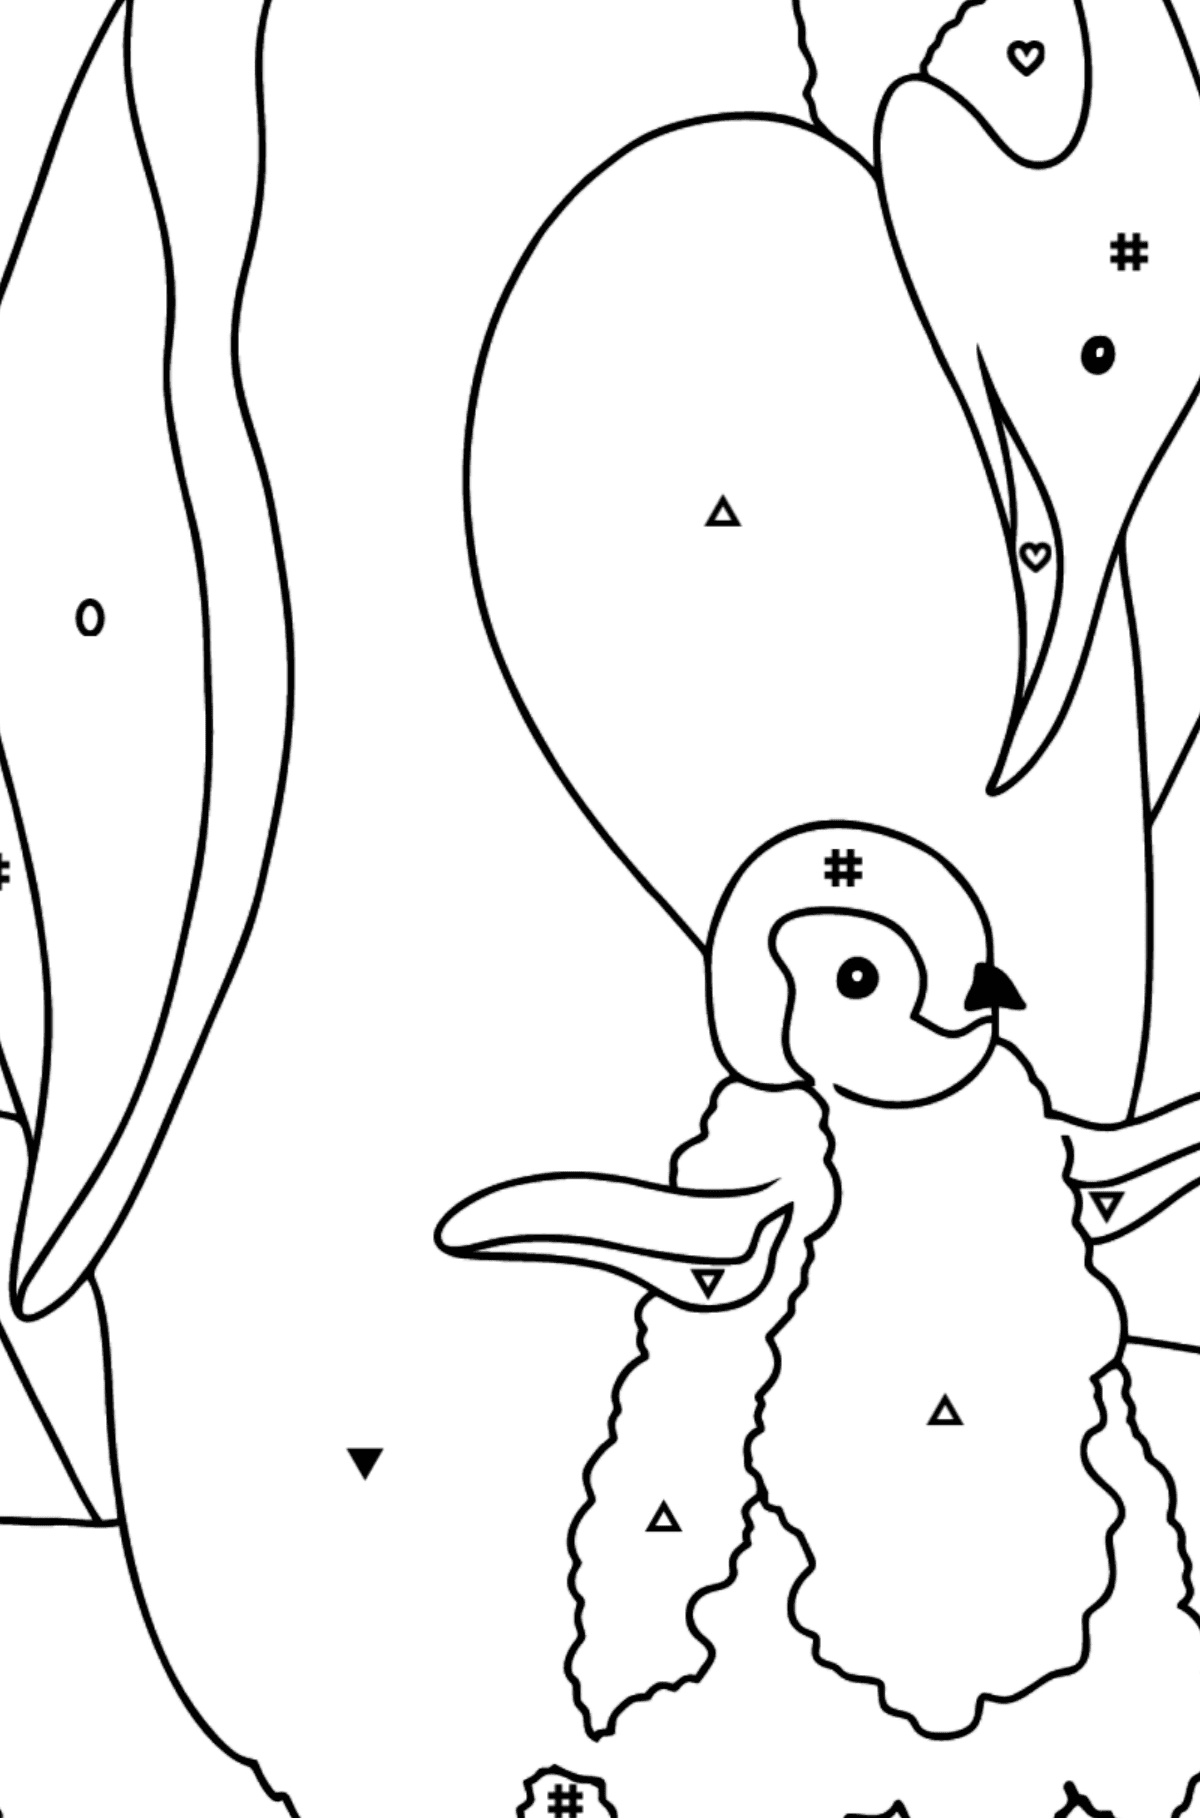 Coloring Page - A Penguin with a Baby - Coloring by Symbols and Geometric Shapes for Kids